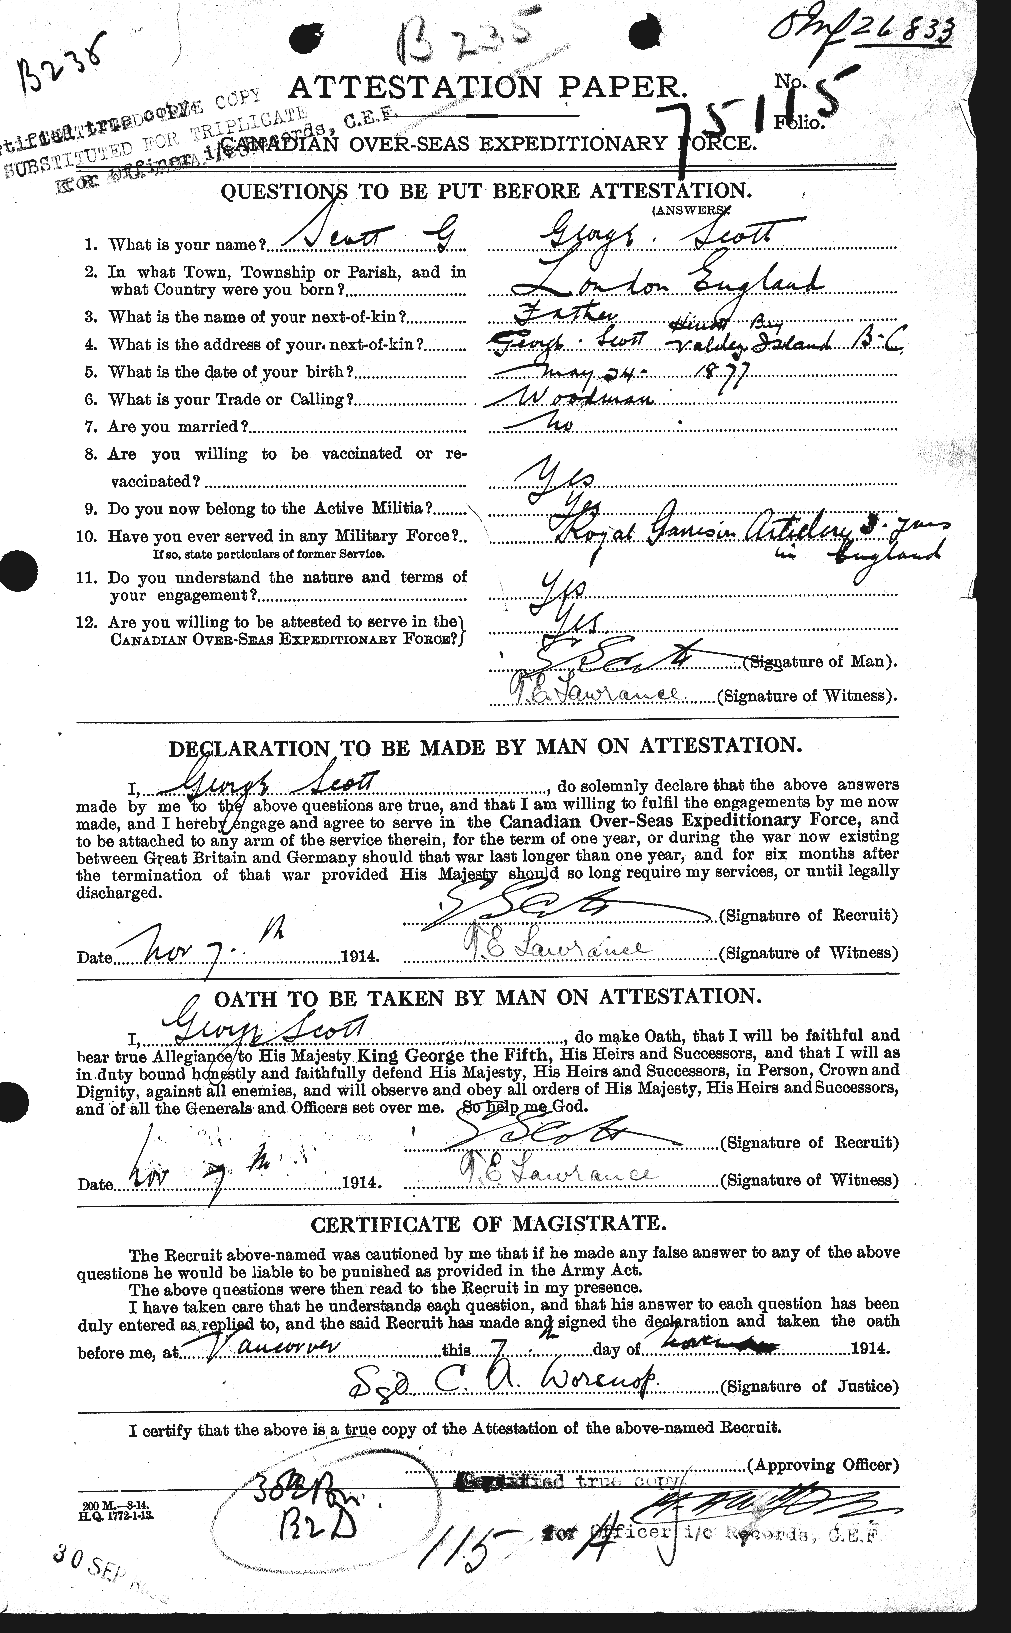 Personnel Records of the First World War - CEF 084364a